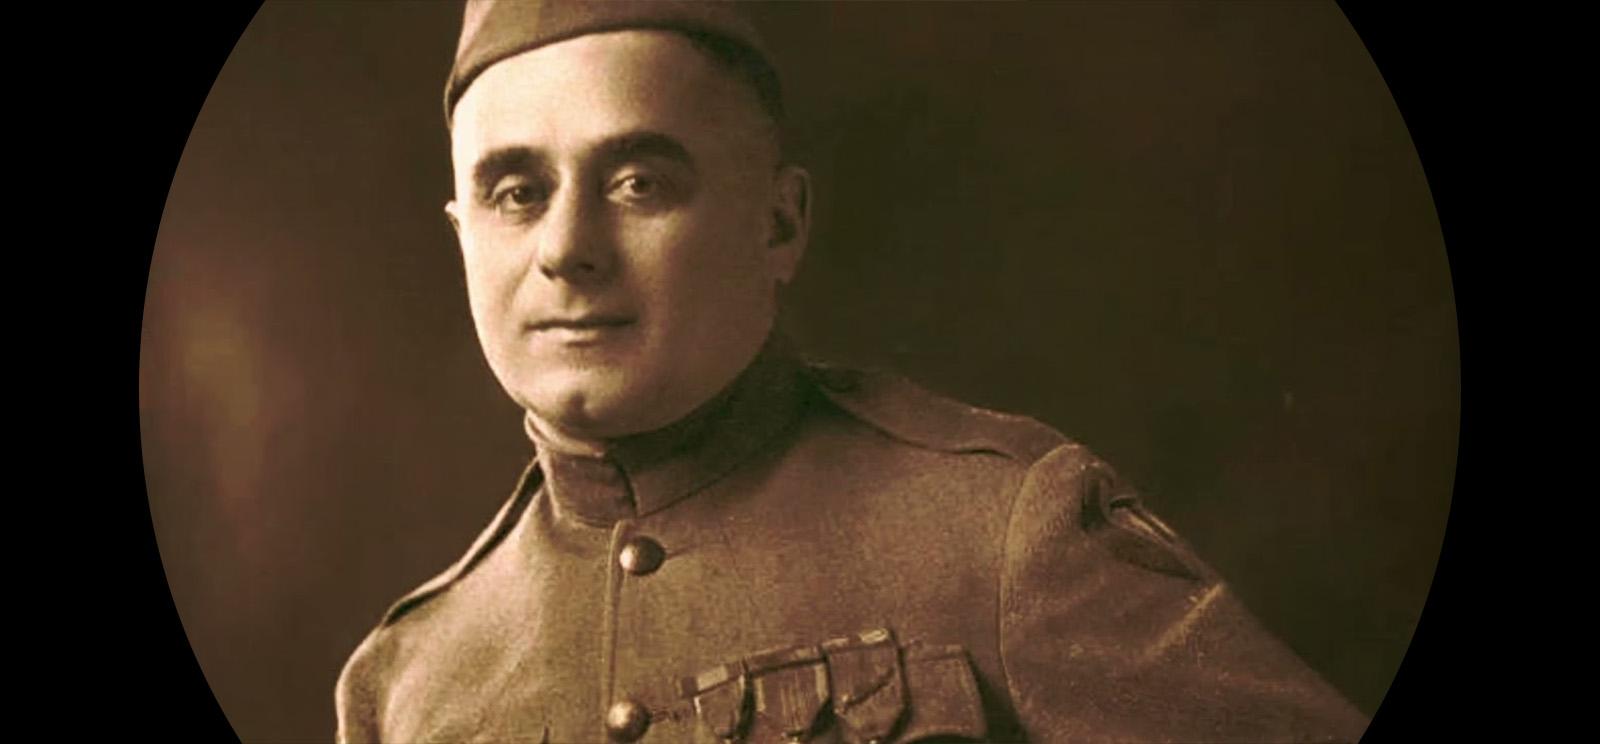 Sepia portrait photograph of a man in military dress uniform, bounded by a black circle.